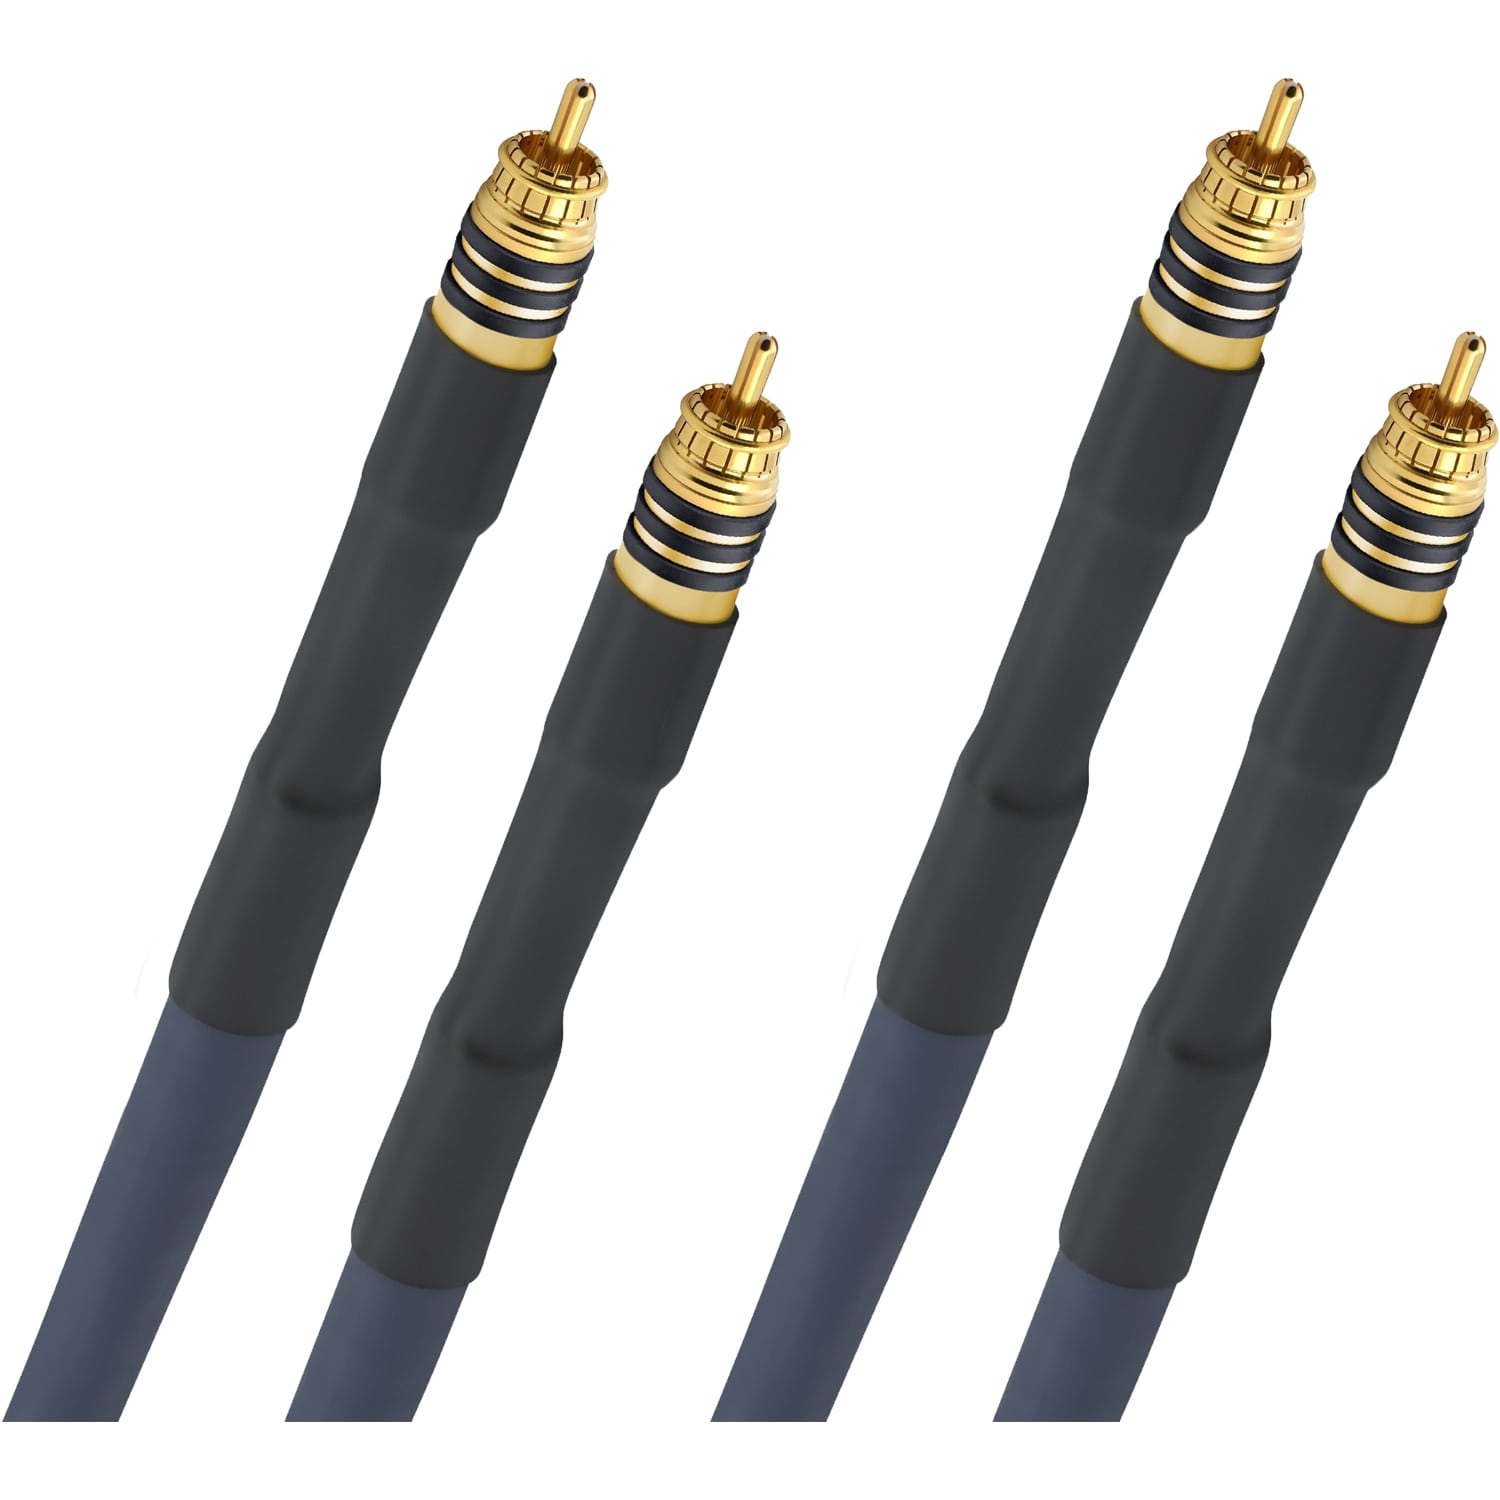 Кабели межблочные аудио Oehlbach STATE OF THE ART XXL Cable RCA, 2x2,00m, gold, D1C13116 кабели межблочные аудио oehlbach state of the art xxl cable rca 2x1 25m gold d1c13113